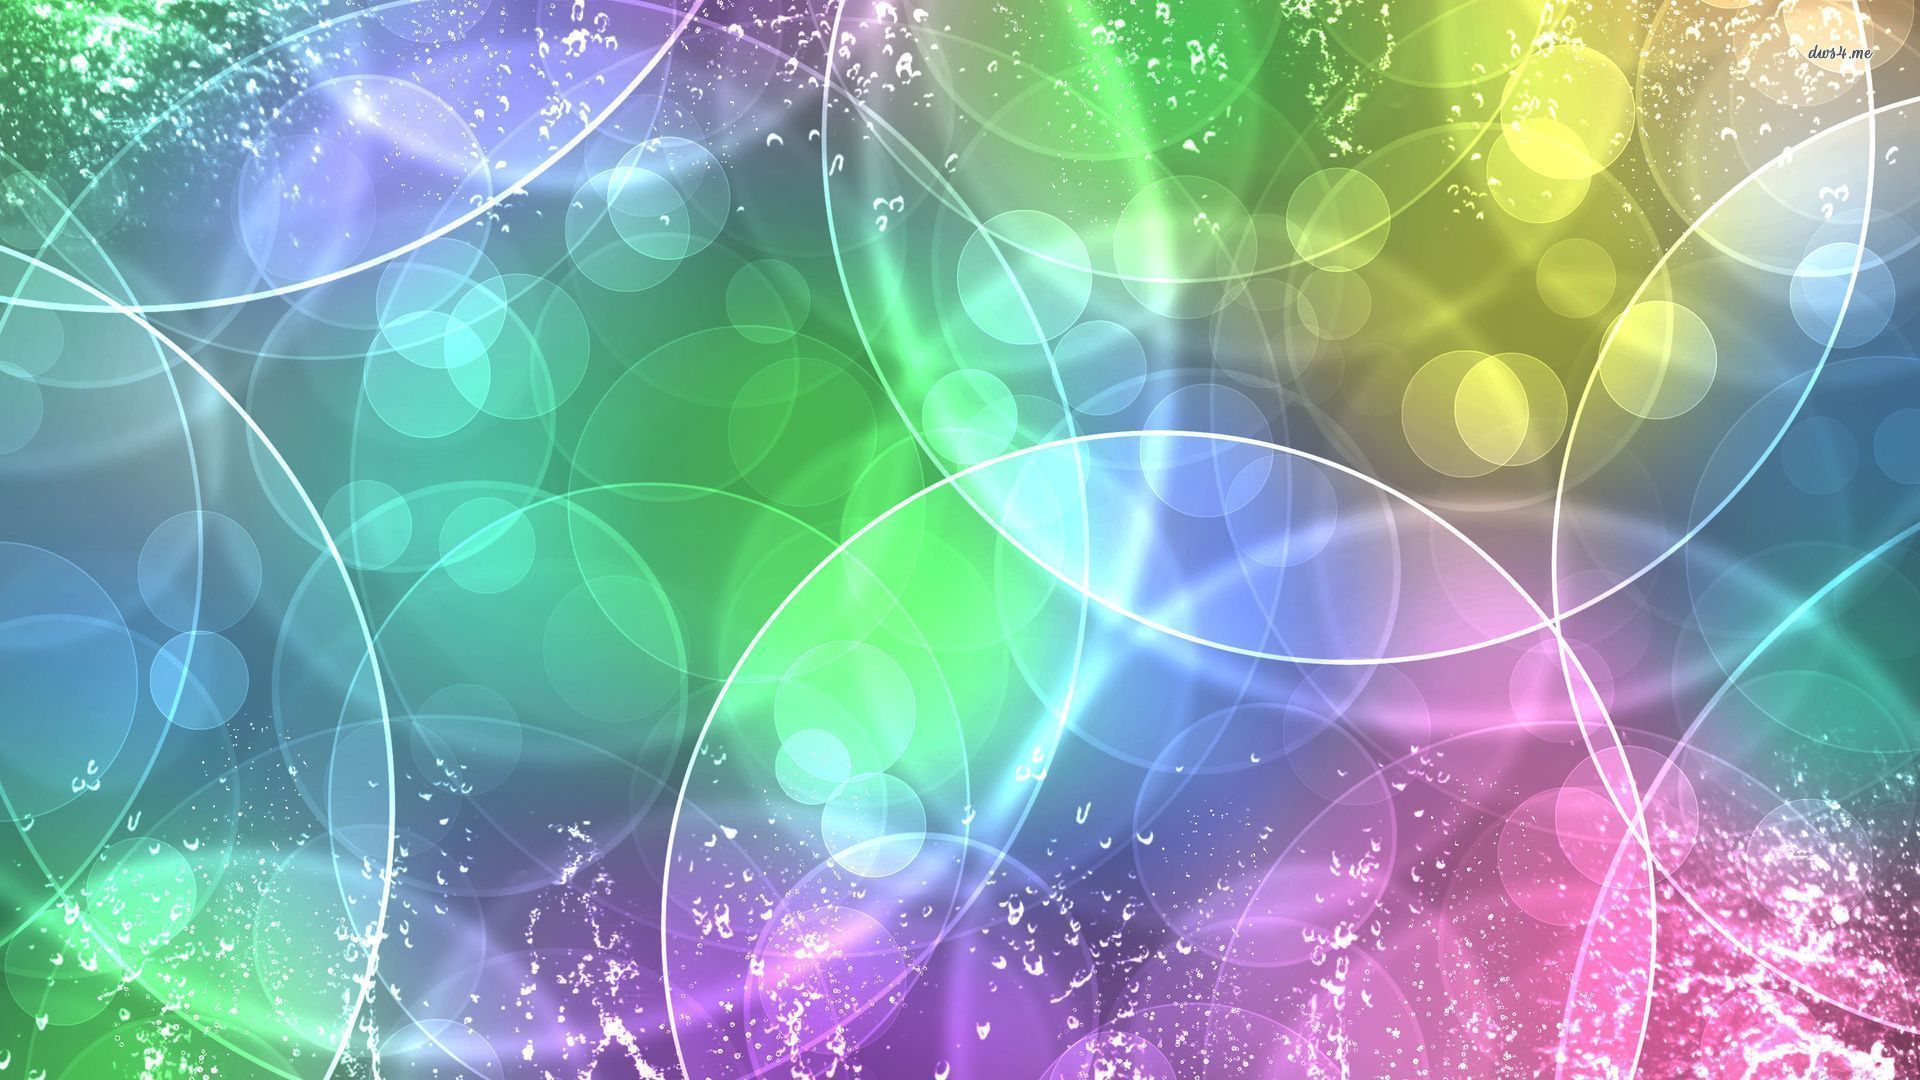 Colorful translucent bubbles wallpaper - Abstract wallpapers - #20270